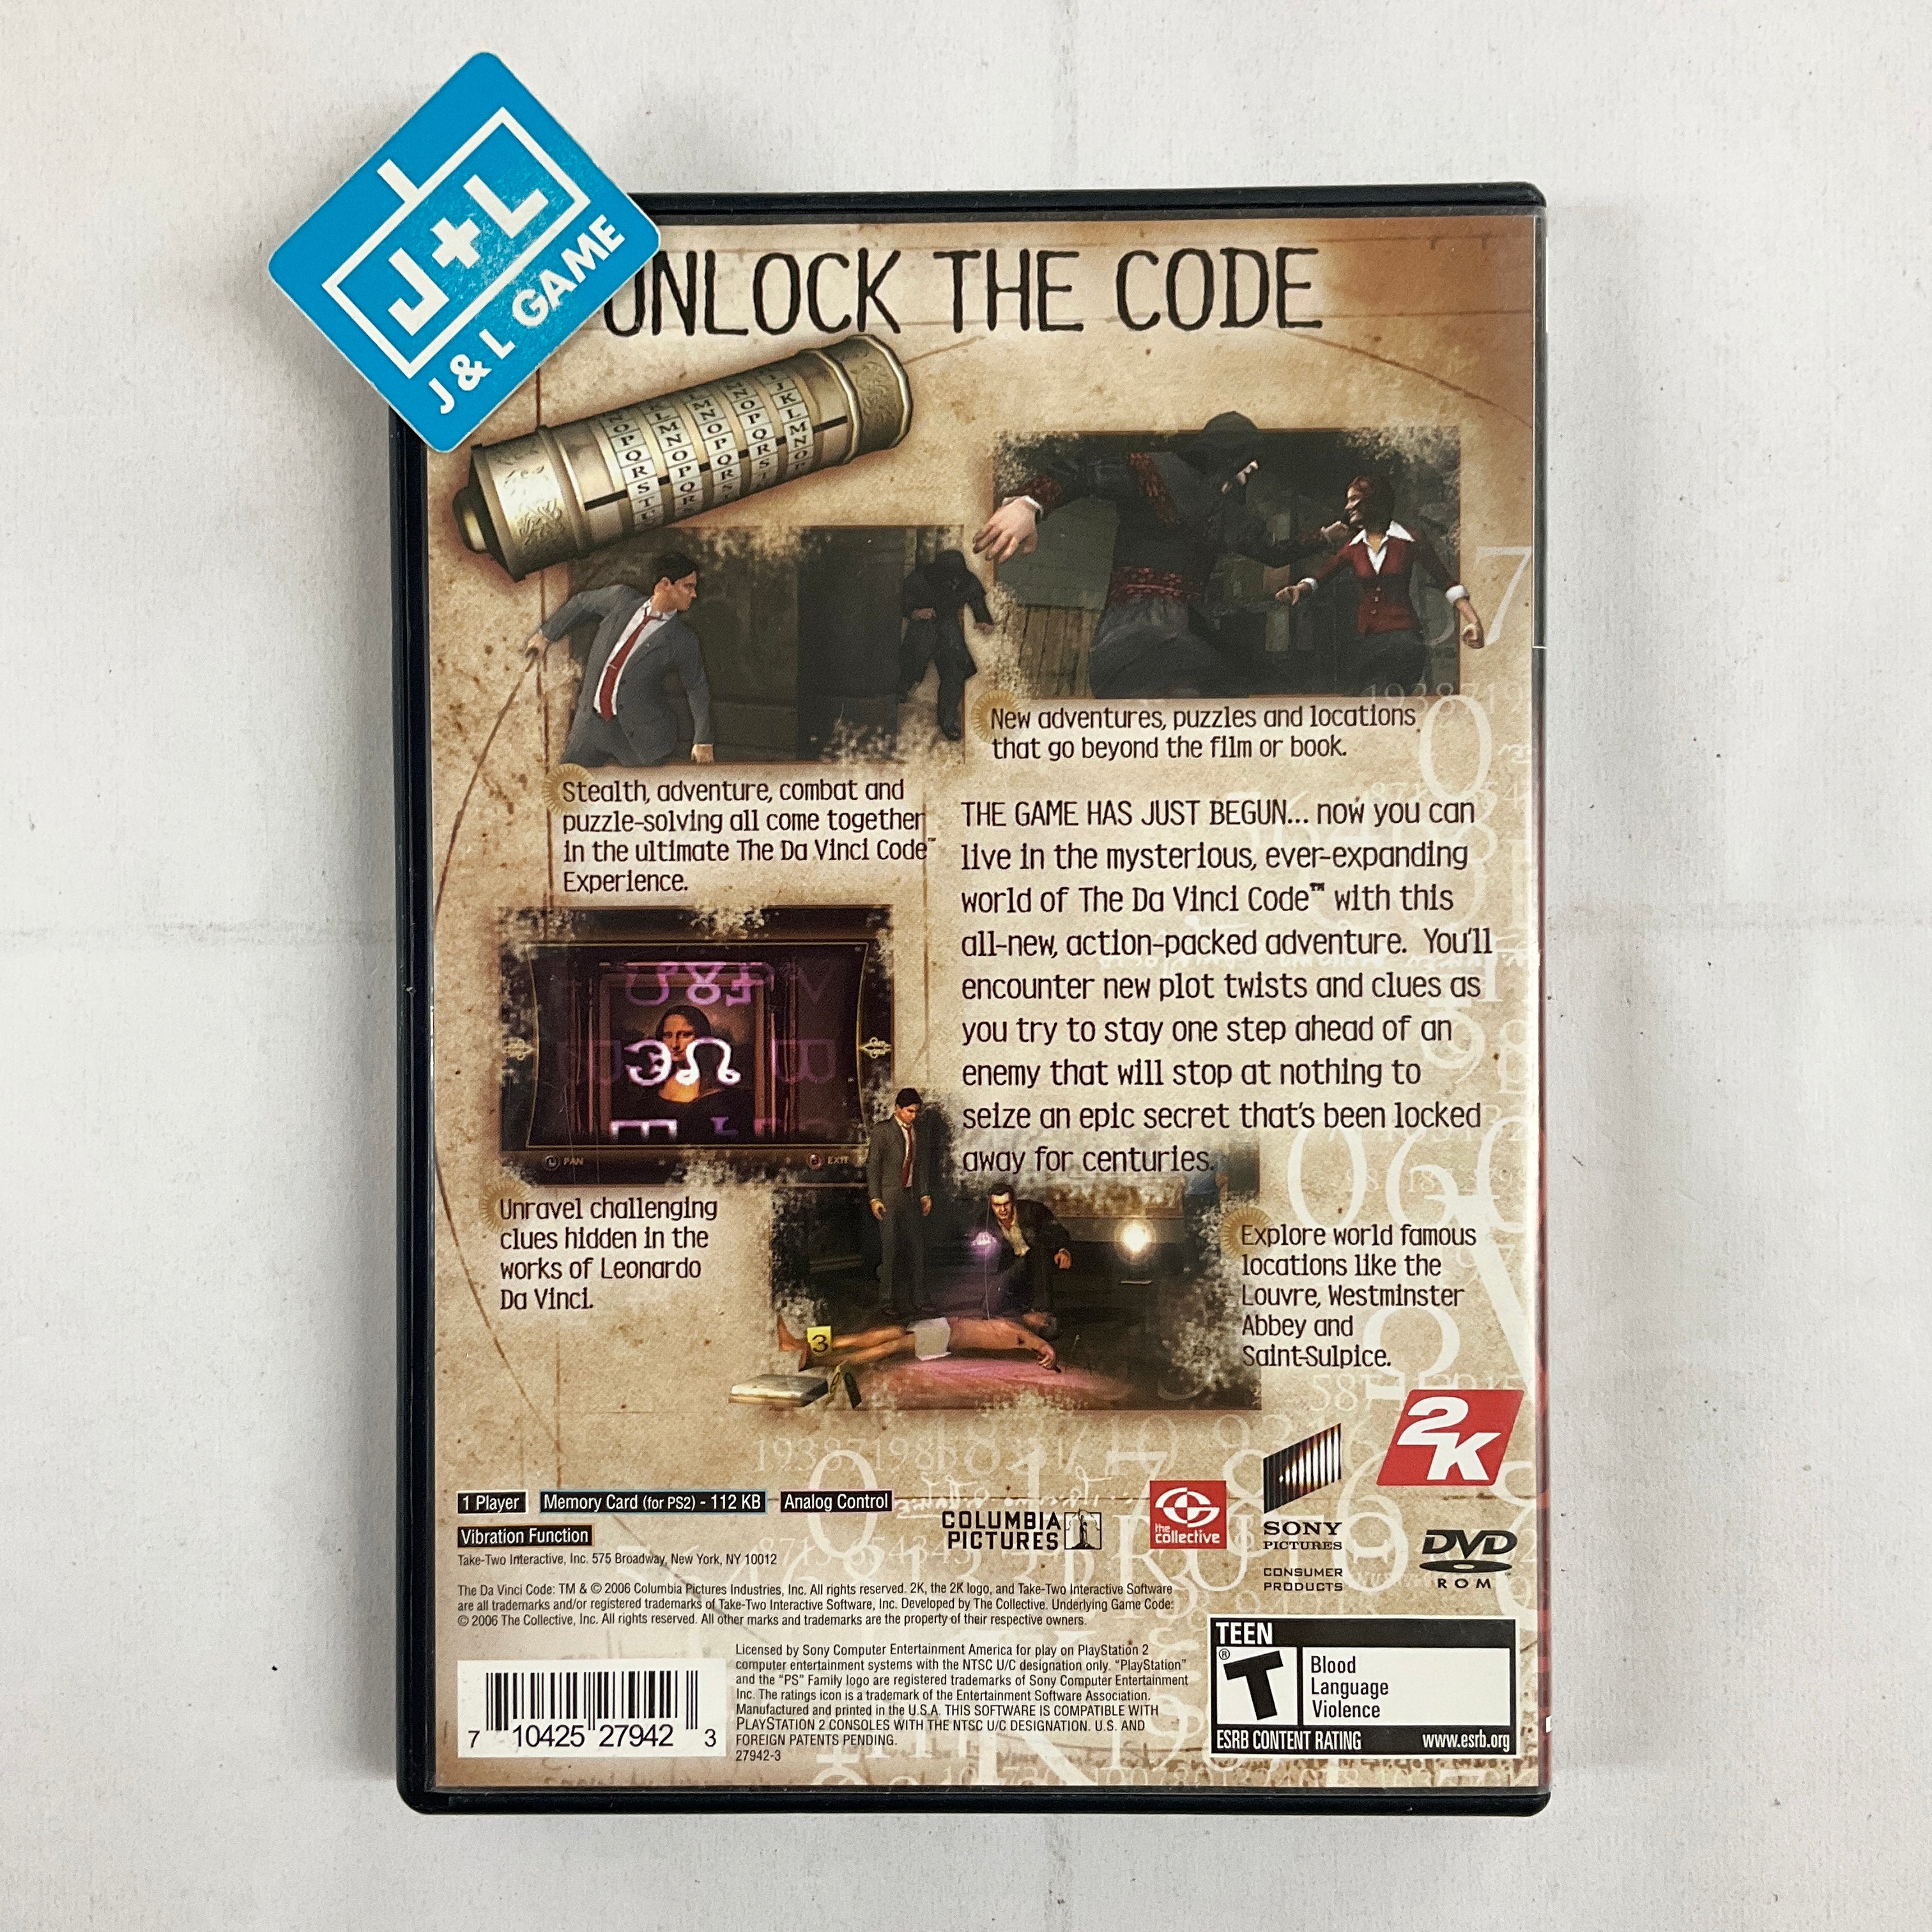 The Da Vinci Code - (PS2) PlayStation 2 [Pre-Owned] Video Games 2K Games   